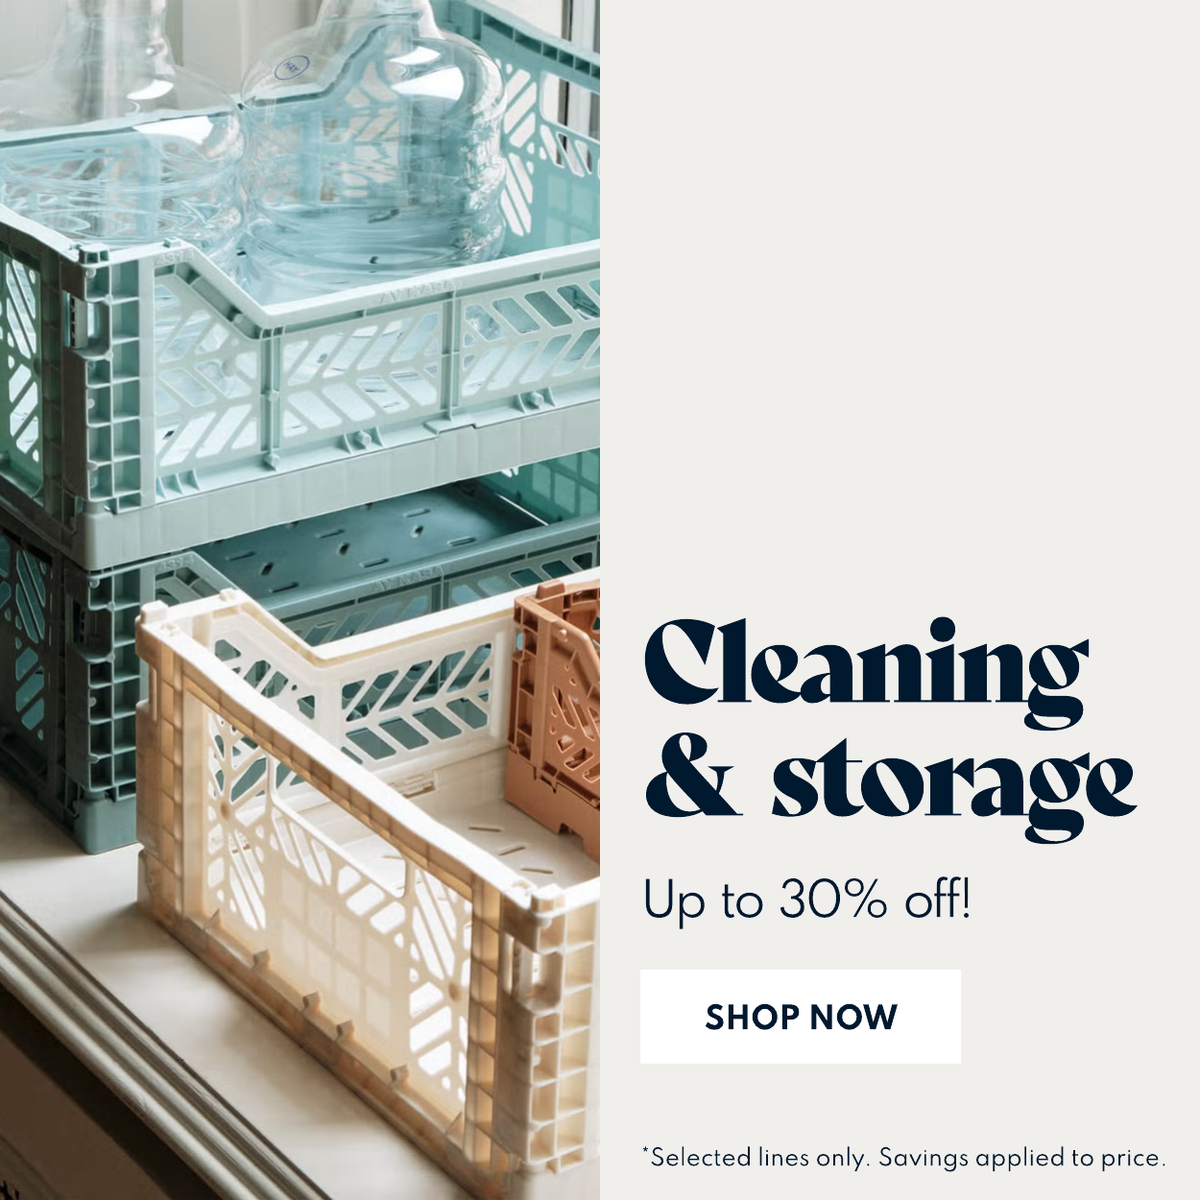 Up to 30% off cleaning & storage